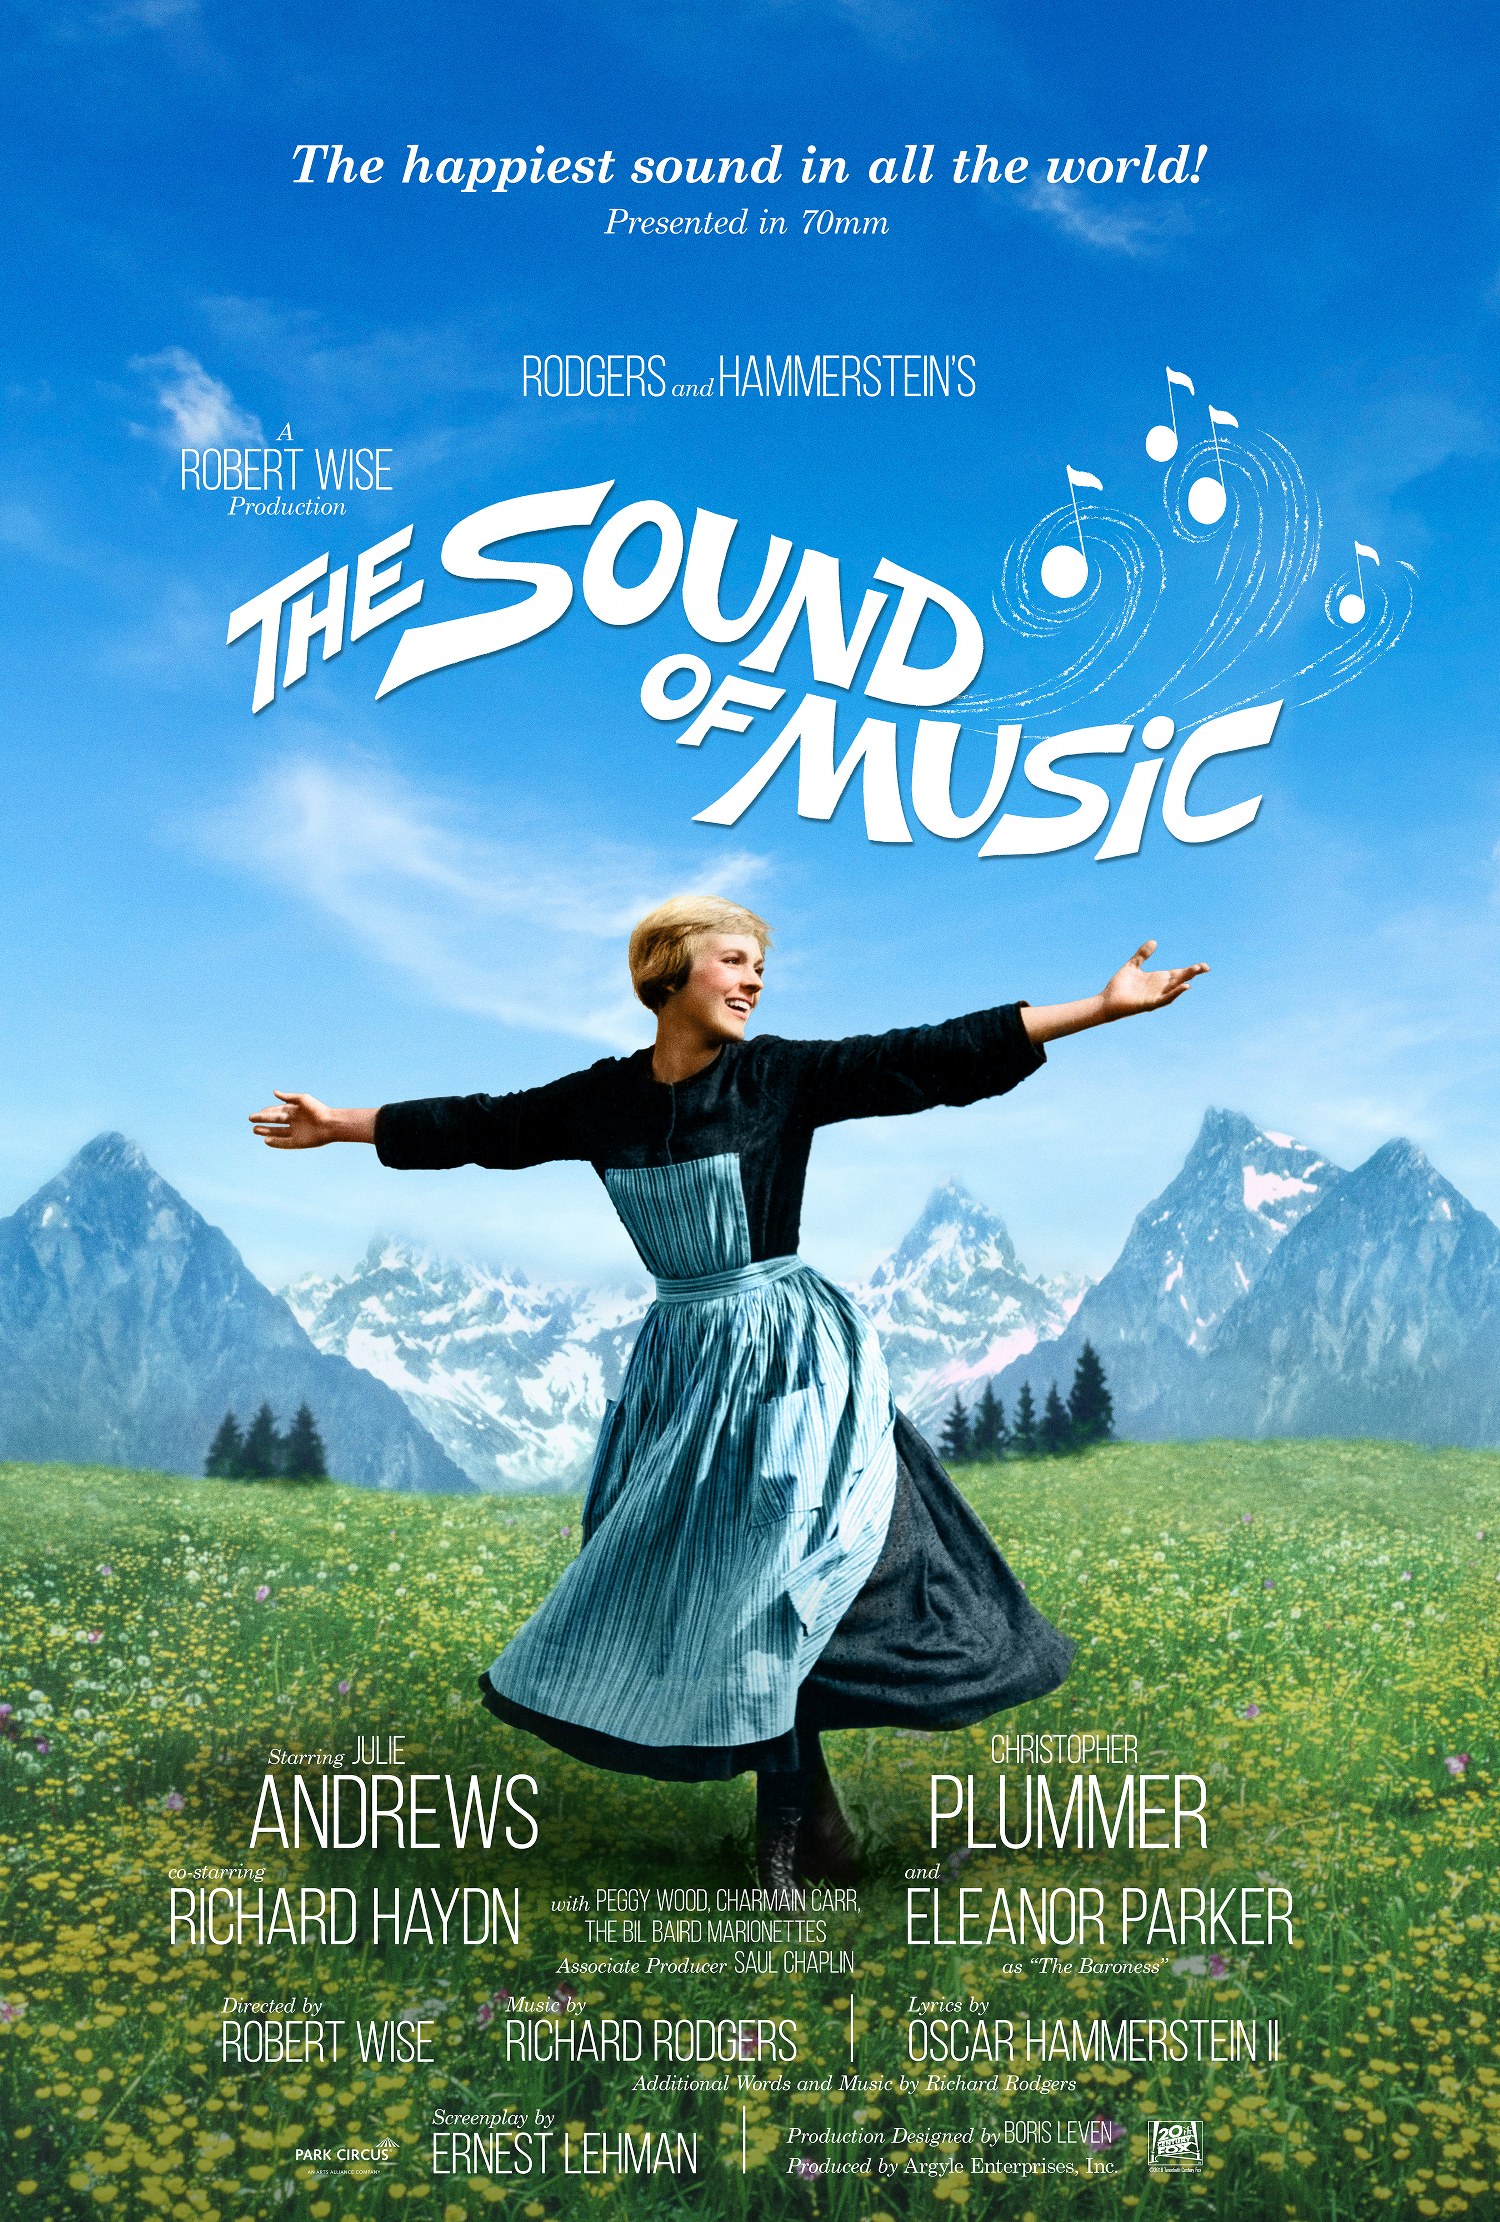 presentation on the sound of music